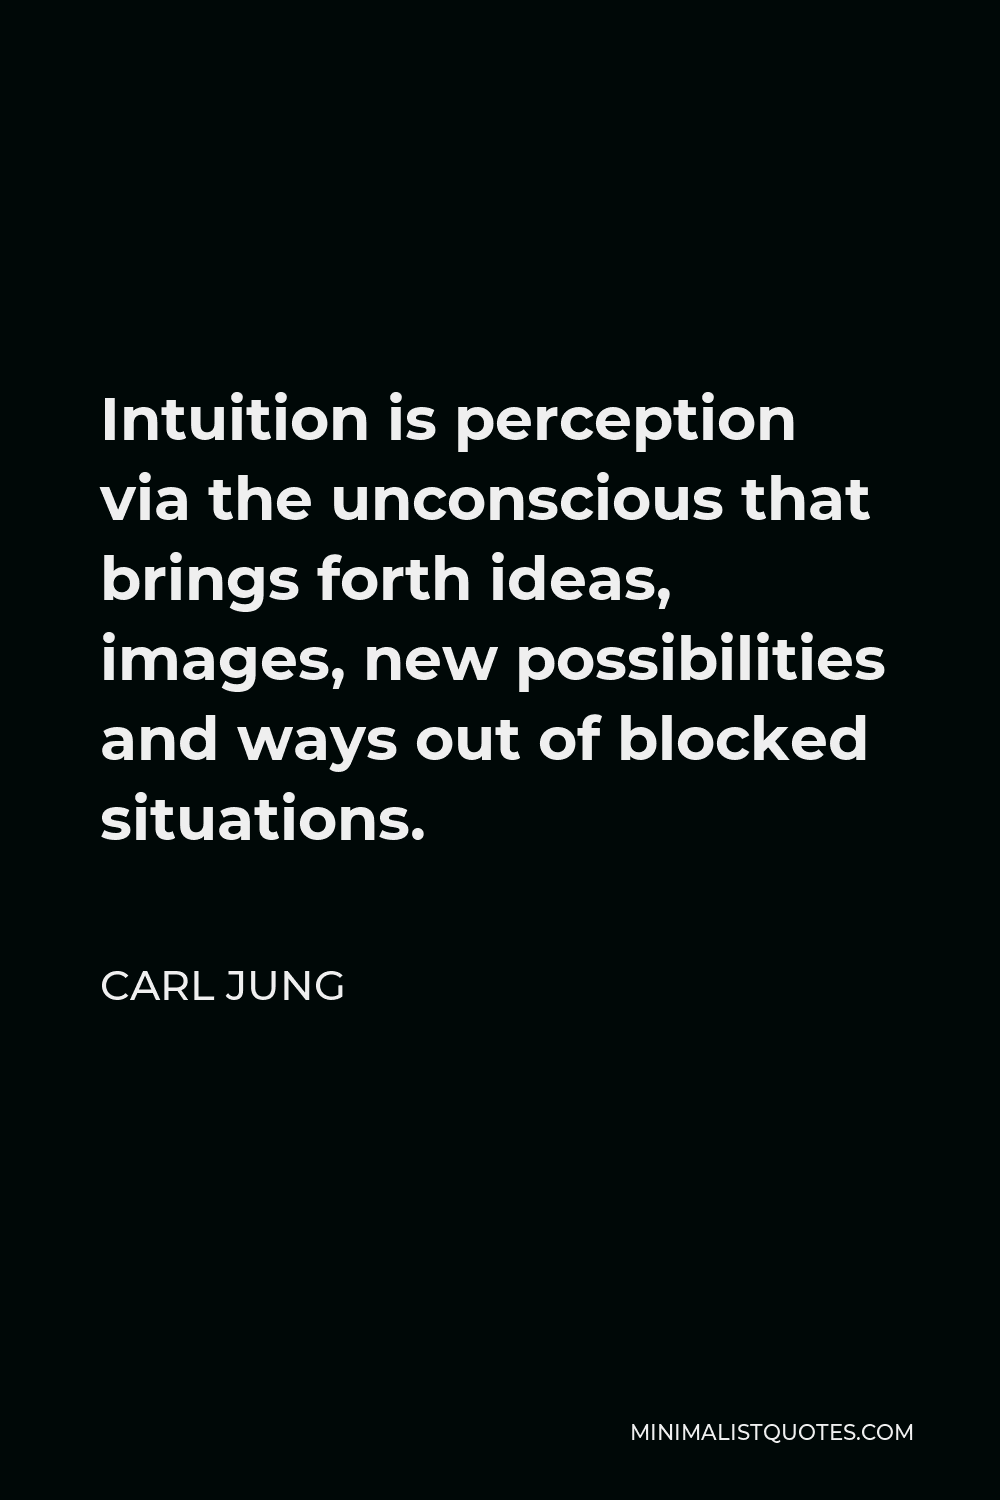 Carl Jung Quote - Intuition is perception via the unconscious that brings forth ideas, images, new possibilities and ways out of blocked situations.